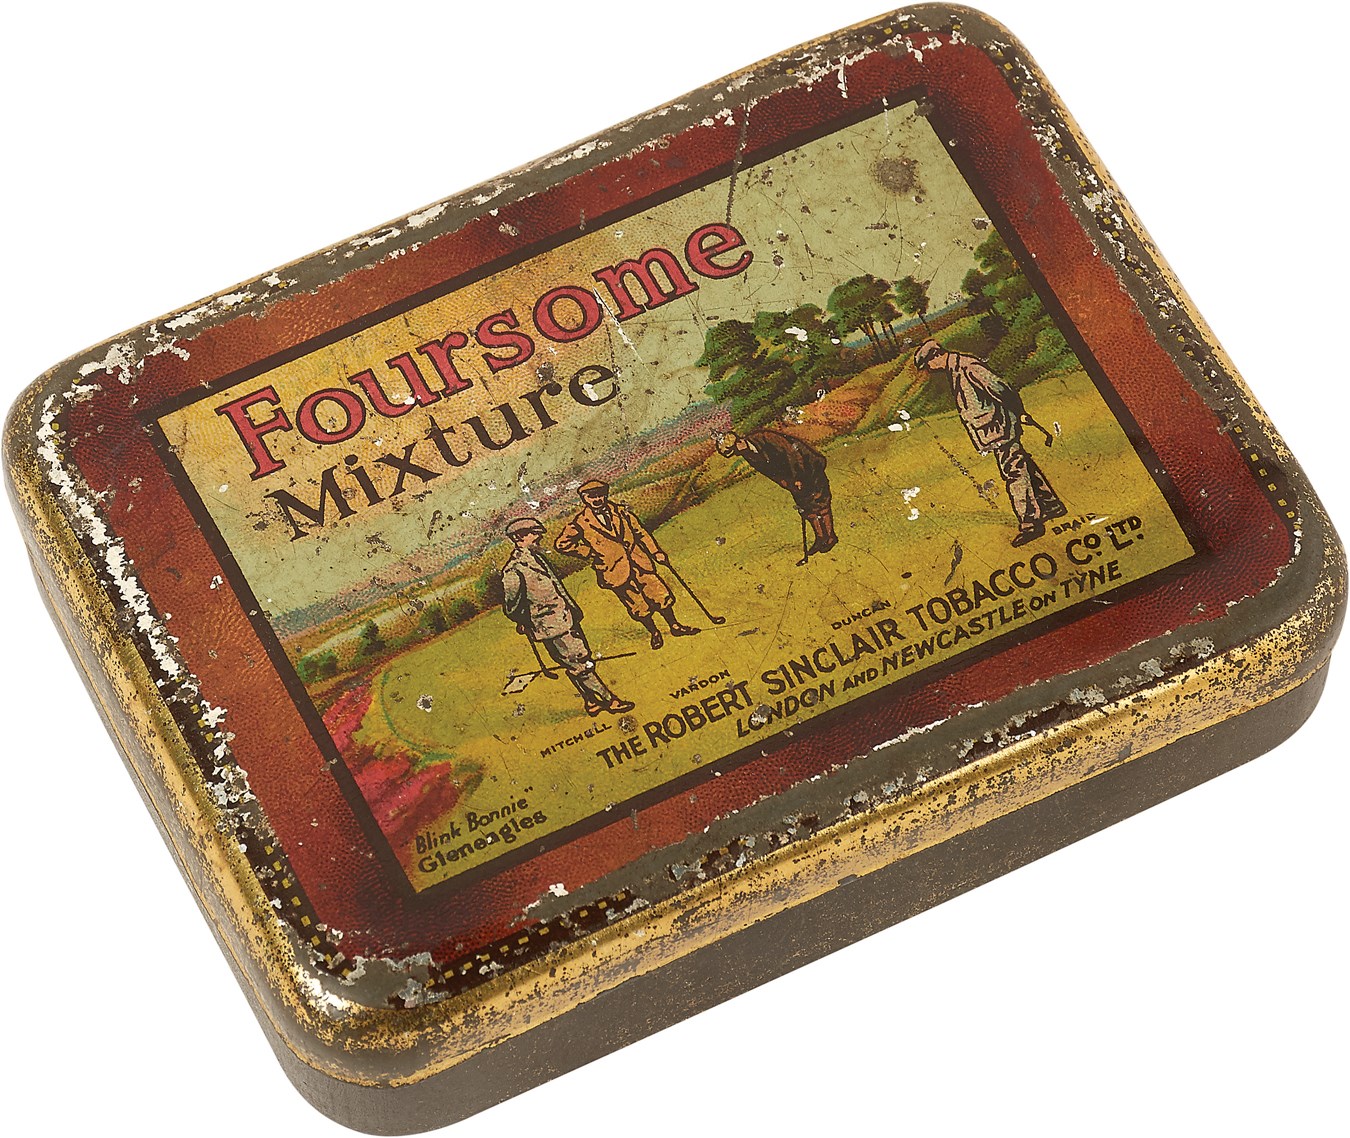 Olympics and All Sports - 19th Century "Foursome Mixture" Tobacco Tin